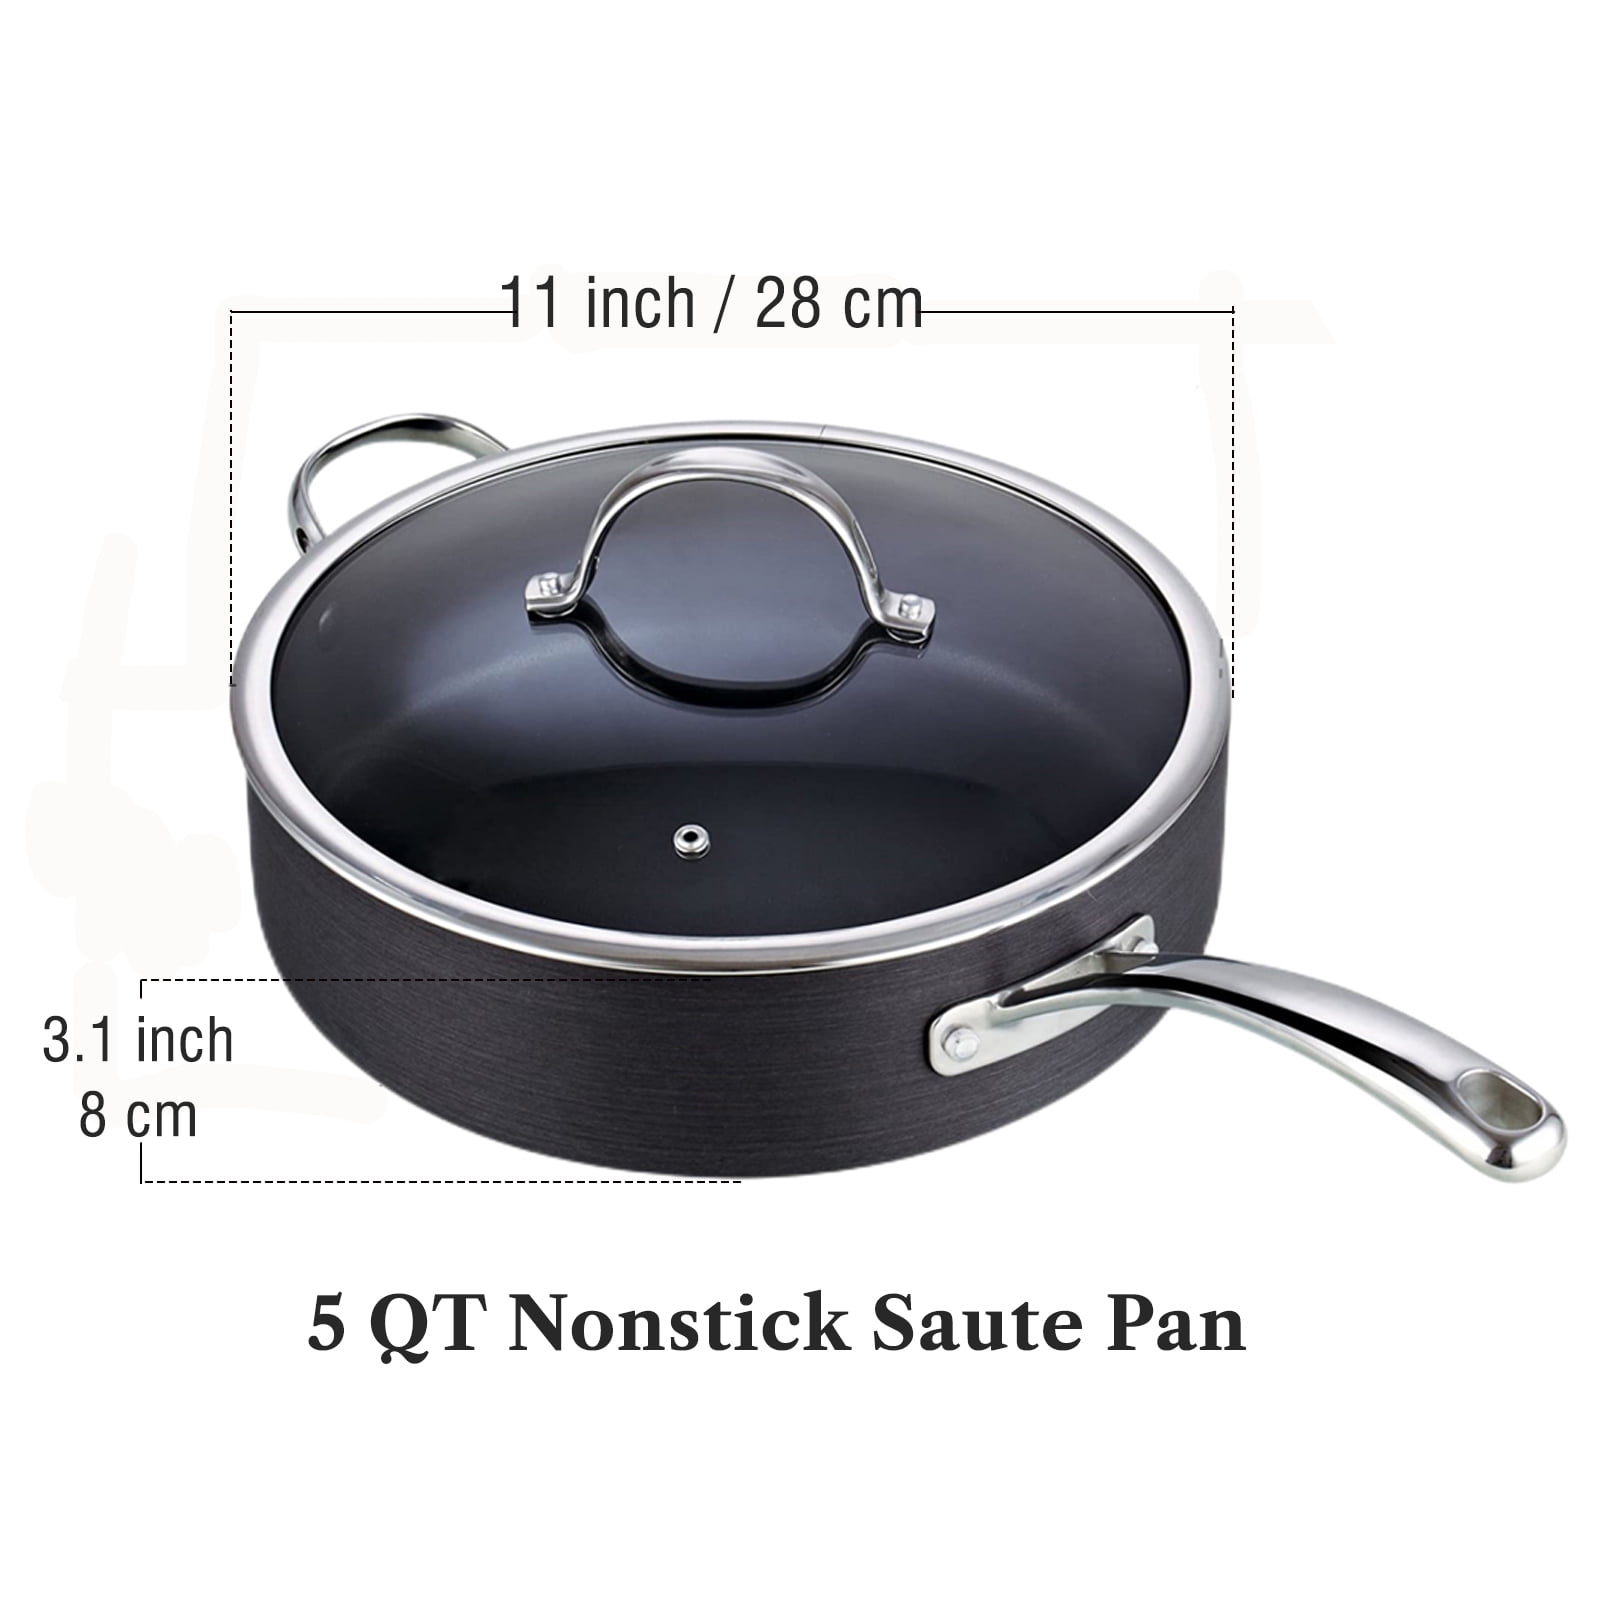 Cooks Standard Classic 5 Quart/11 Stainless Steel Deep Saute Pan with Lid